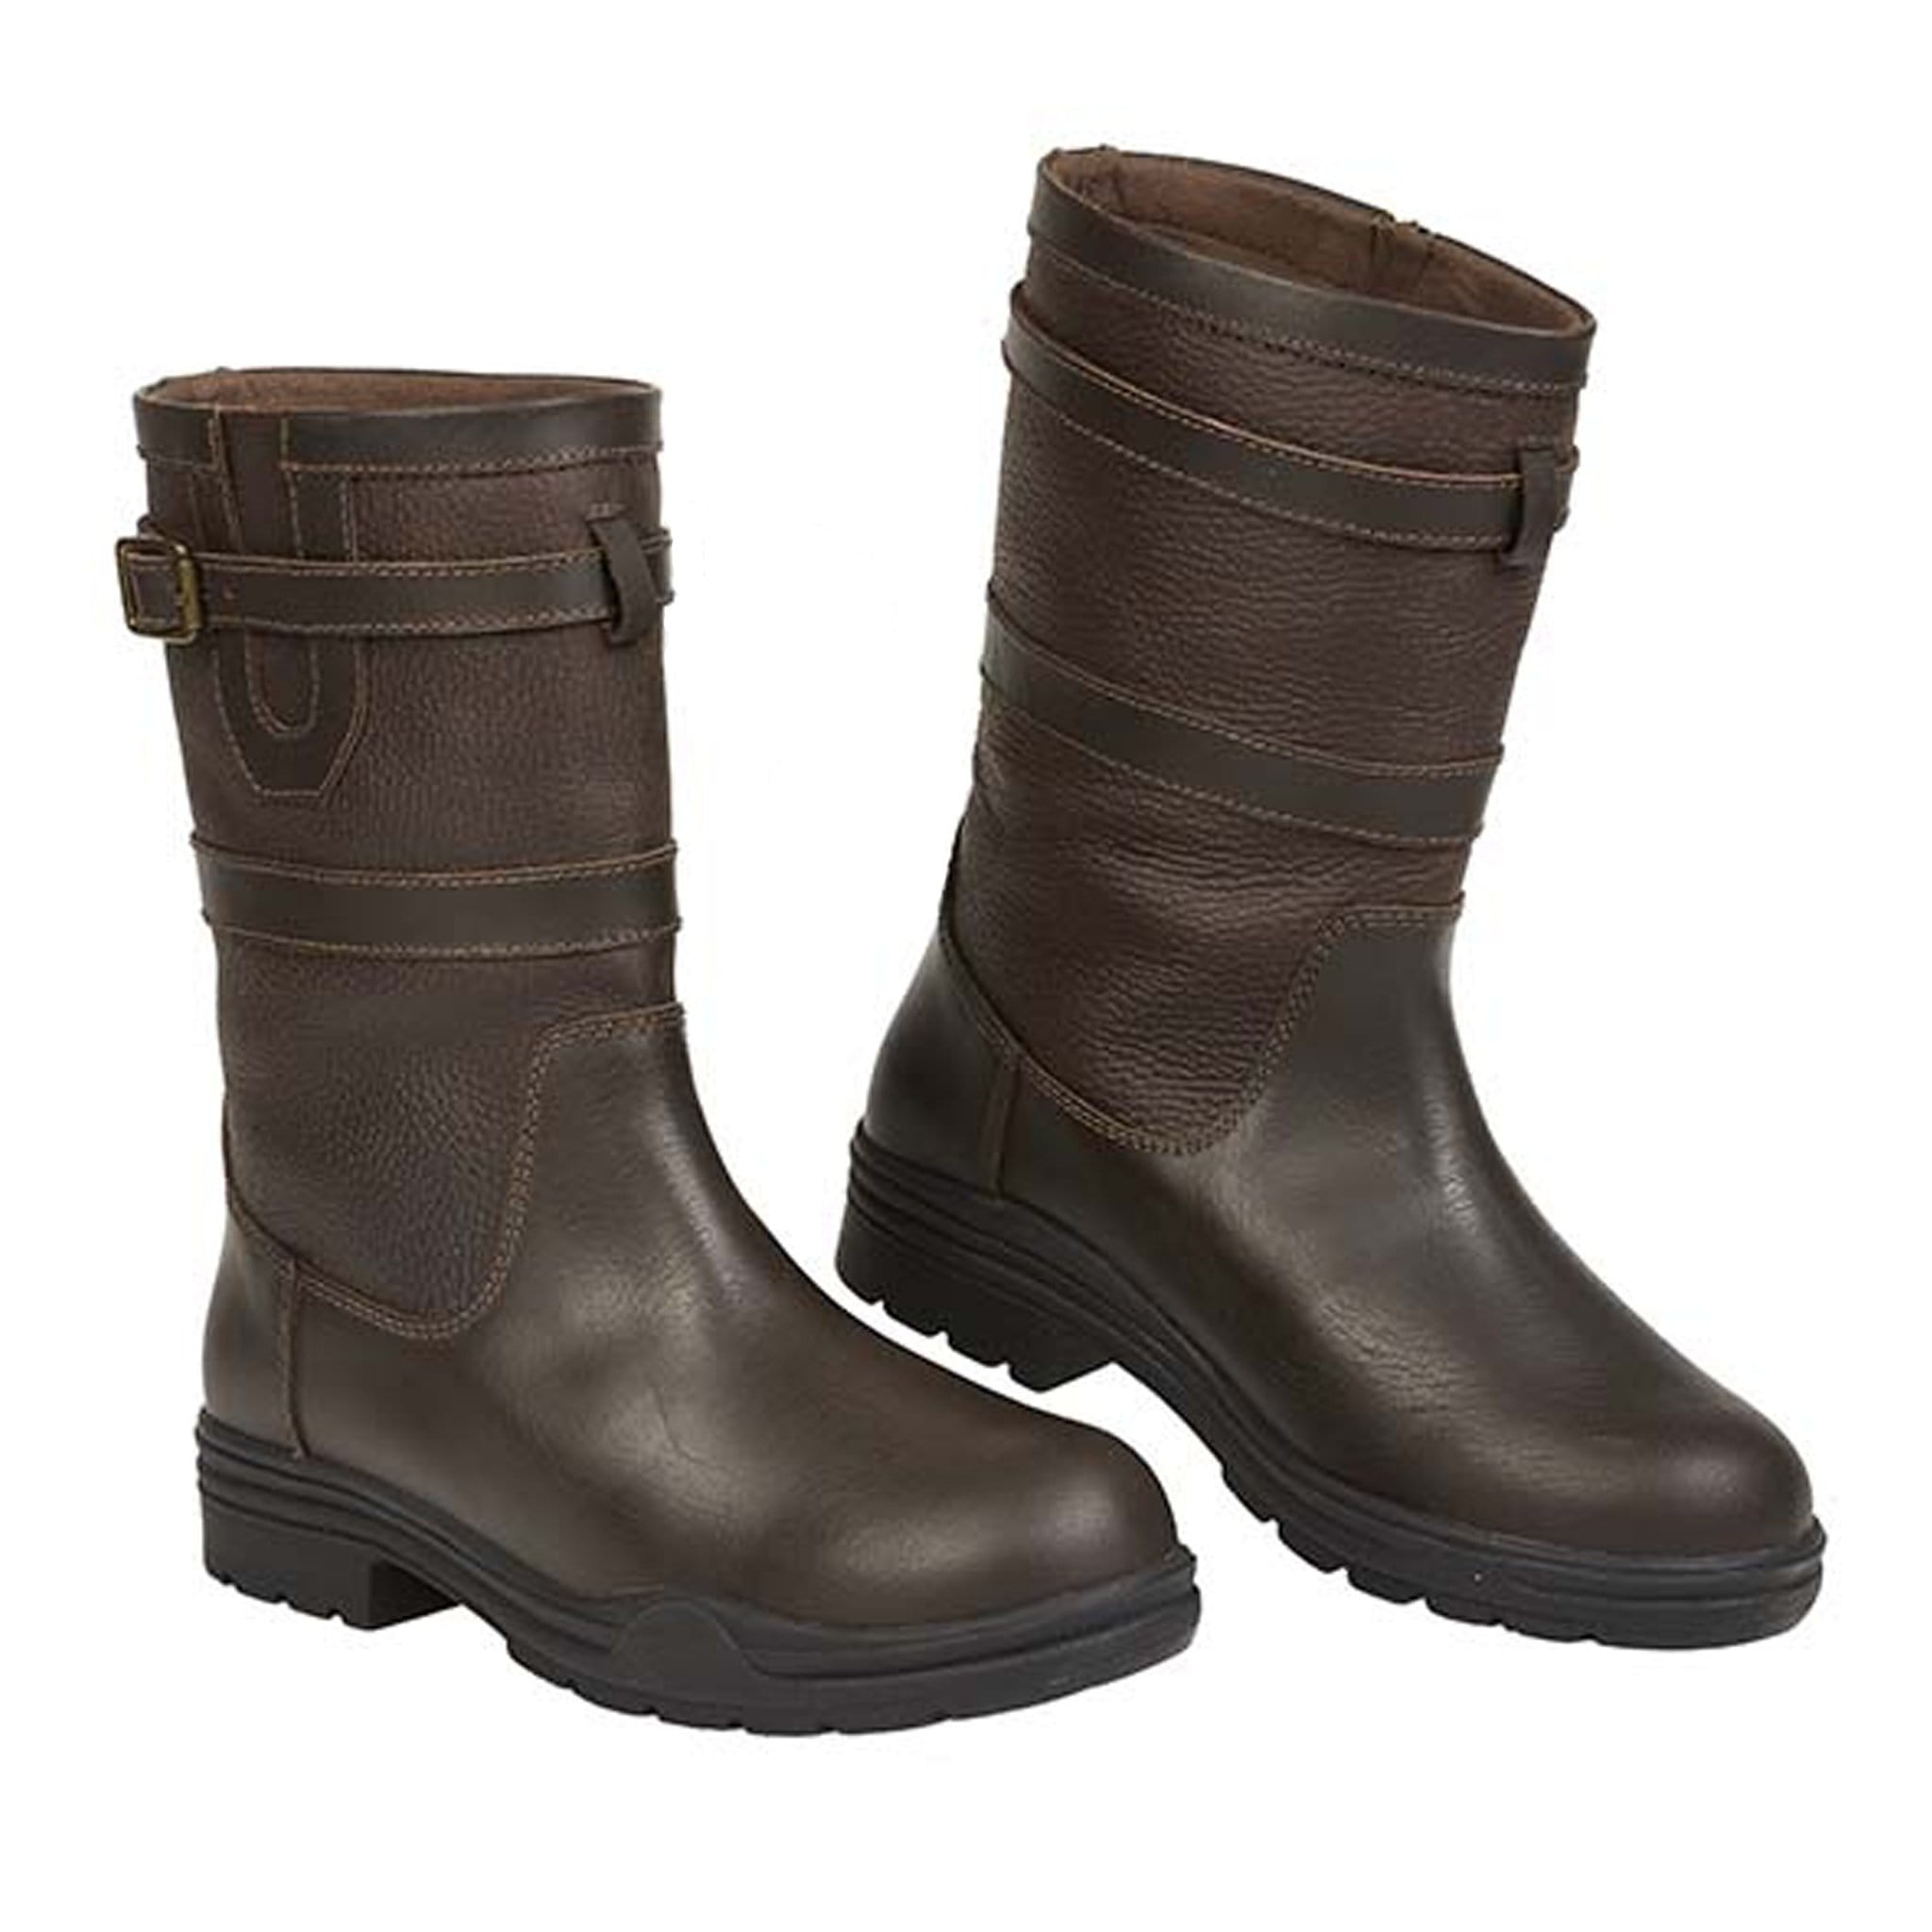 Elico Ilkley Short Country Boots